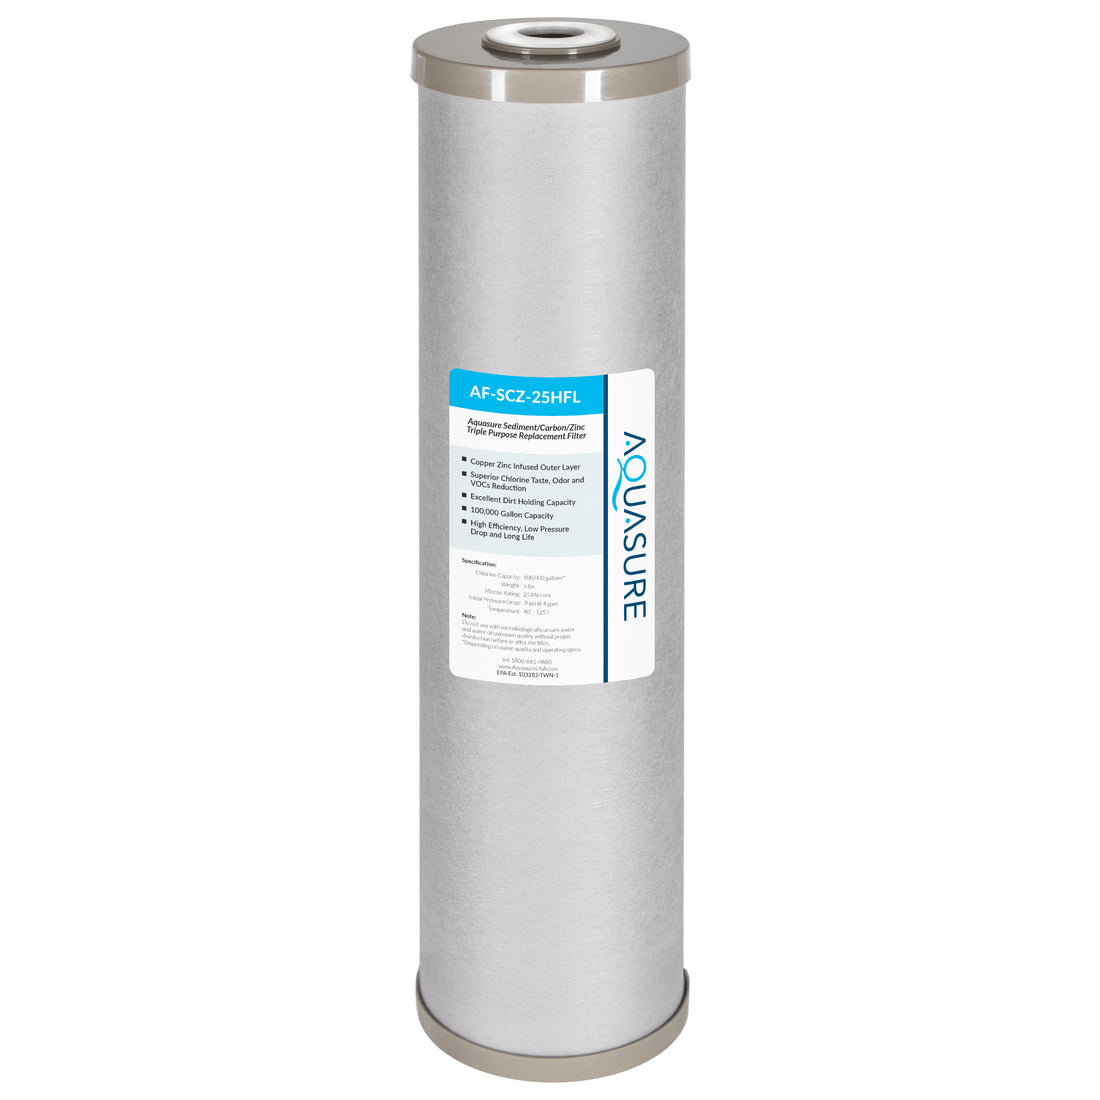 Fortitude V2 Series | Sediment/Carbon/Zinc Inhibiting Triple Purpose Replacement Filter - Large